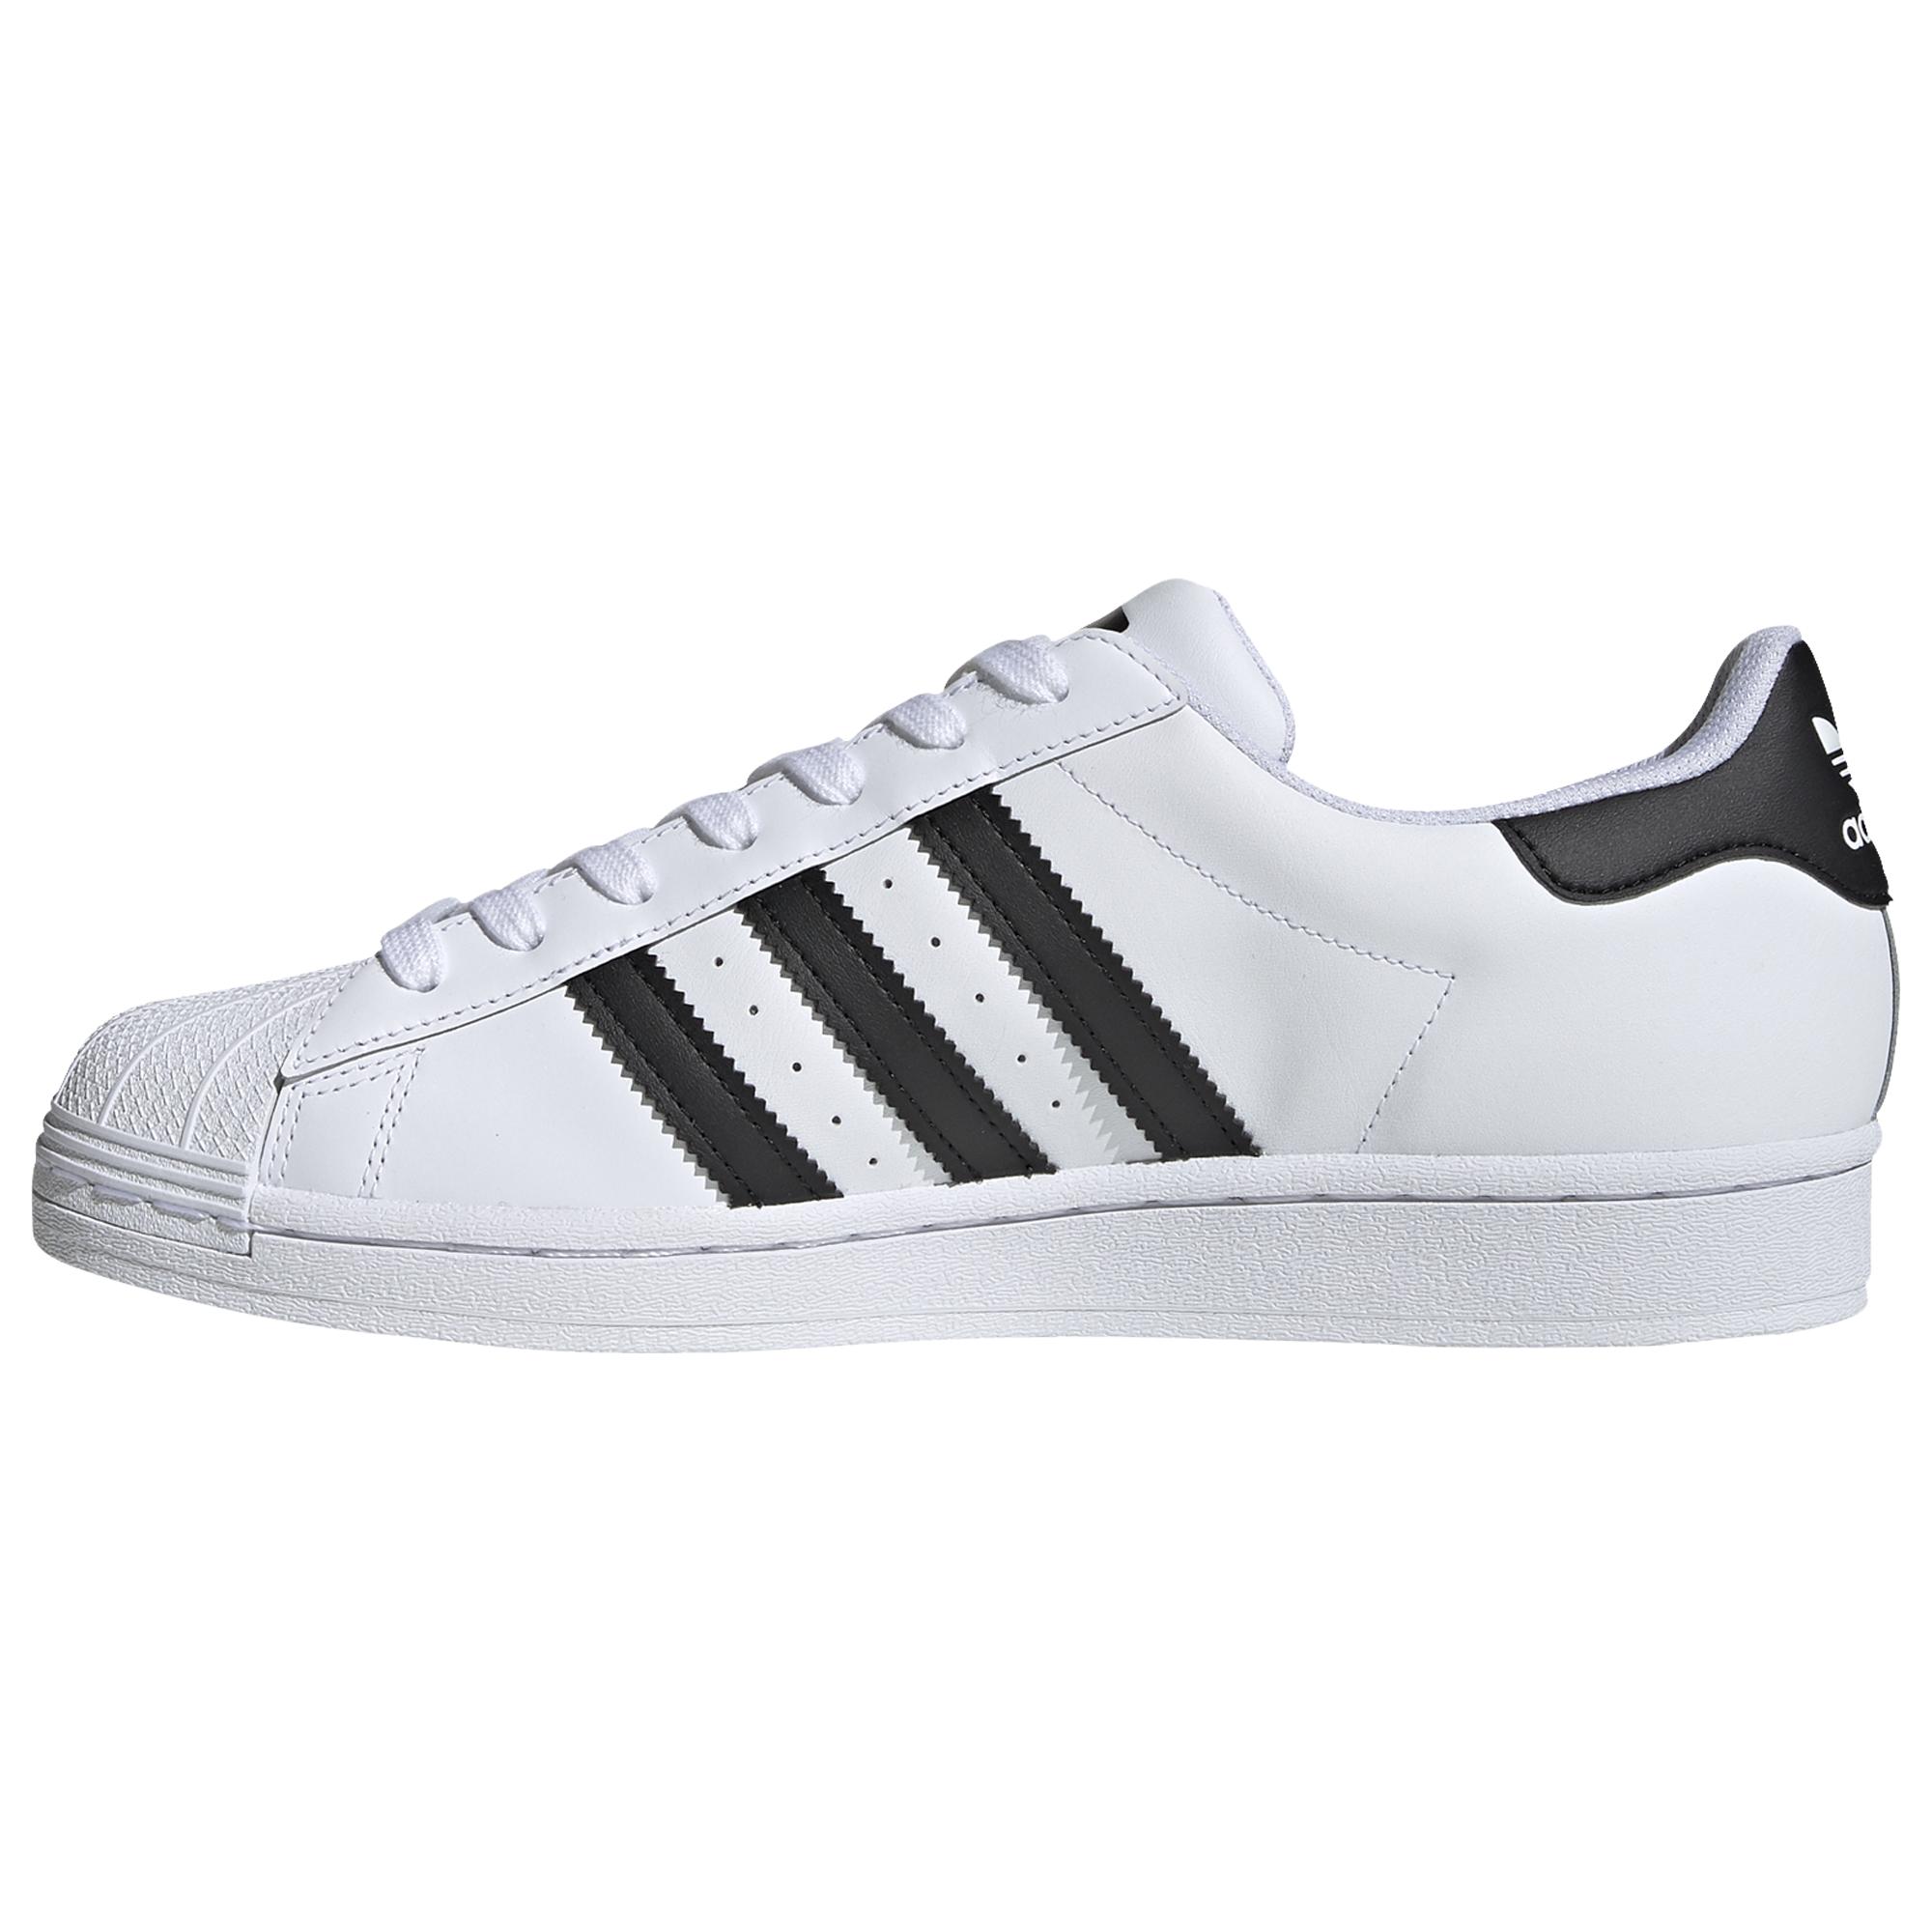 adidas Originals Leather Superstar Basketball Shoes in White/Black ...